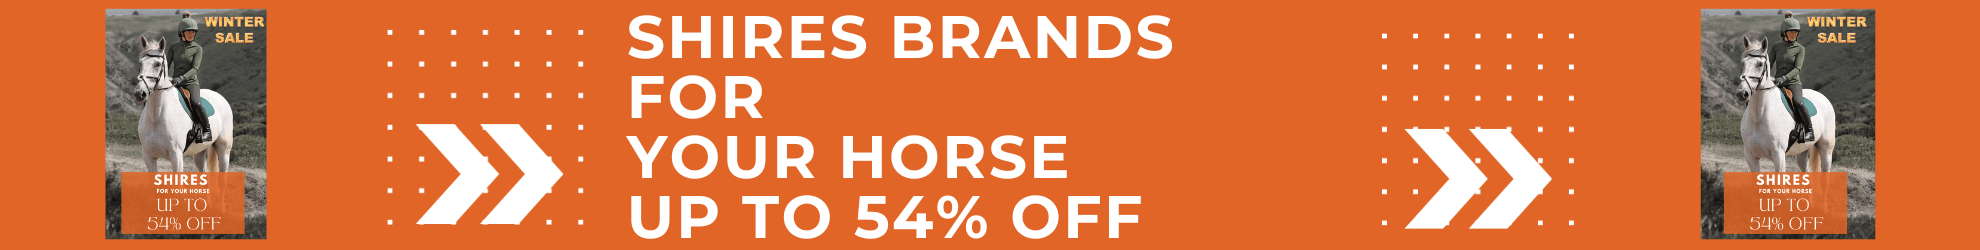 Shires Brands for Your Horse